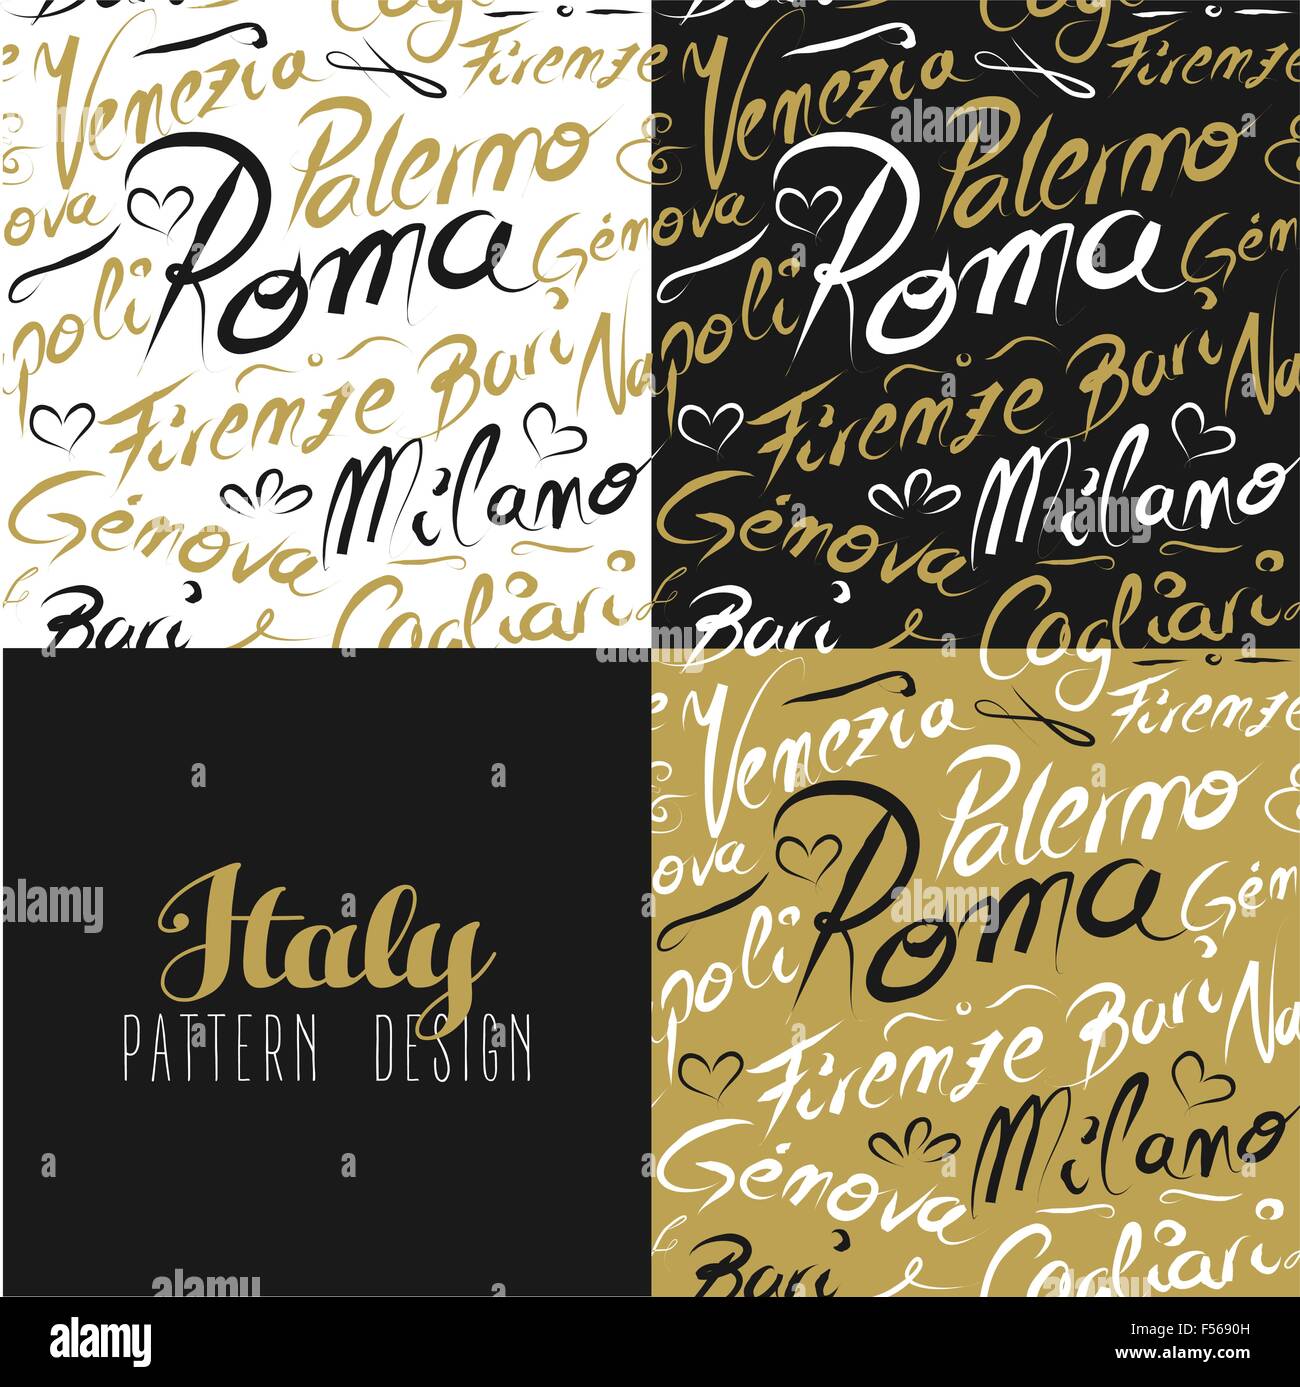 Travel Italy Europe famous cities with handmade calligraphy. Milan city, Rome, Florence, Napoli, Palermo. Stock Vector